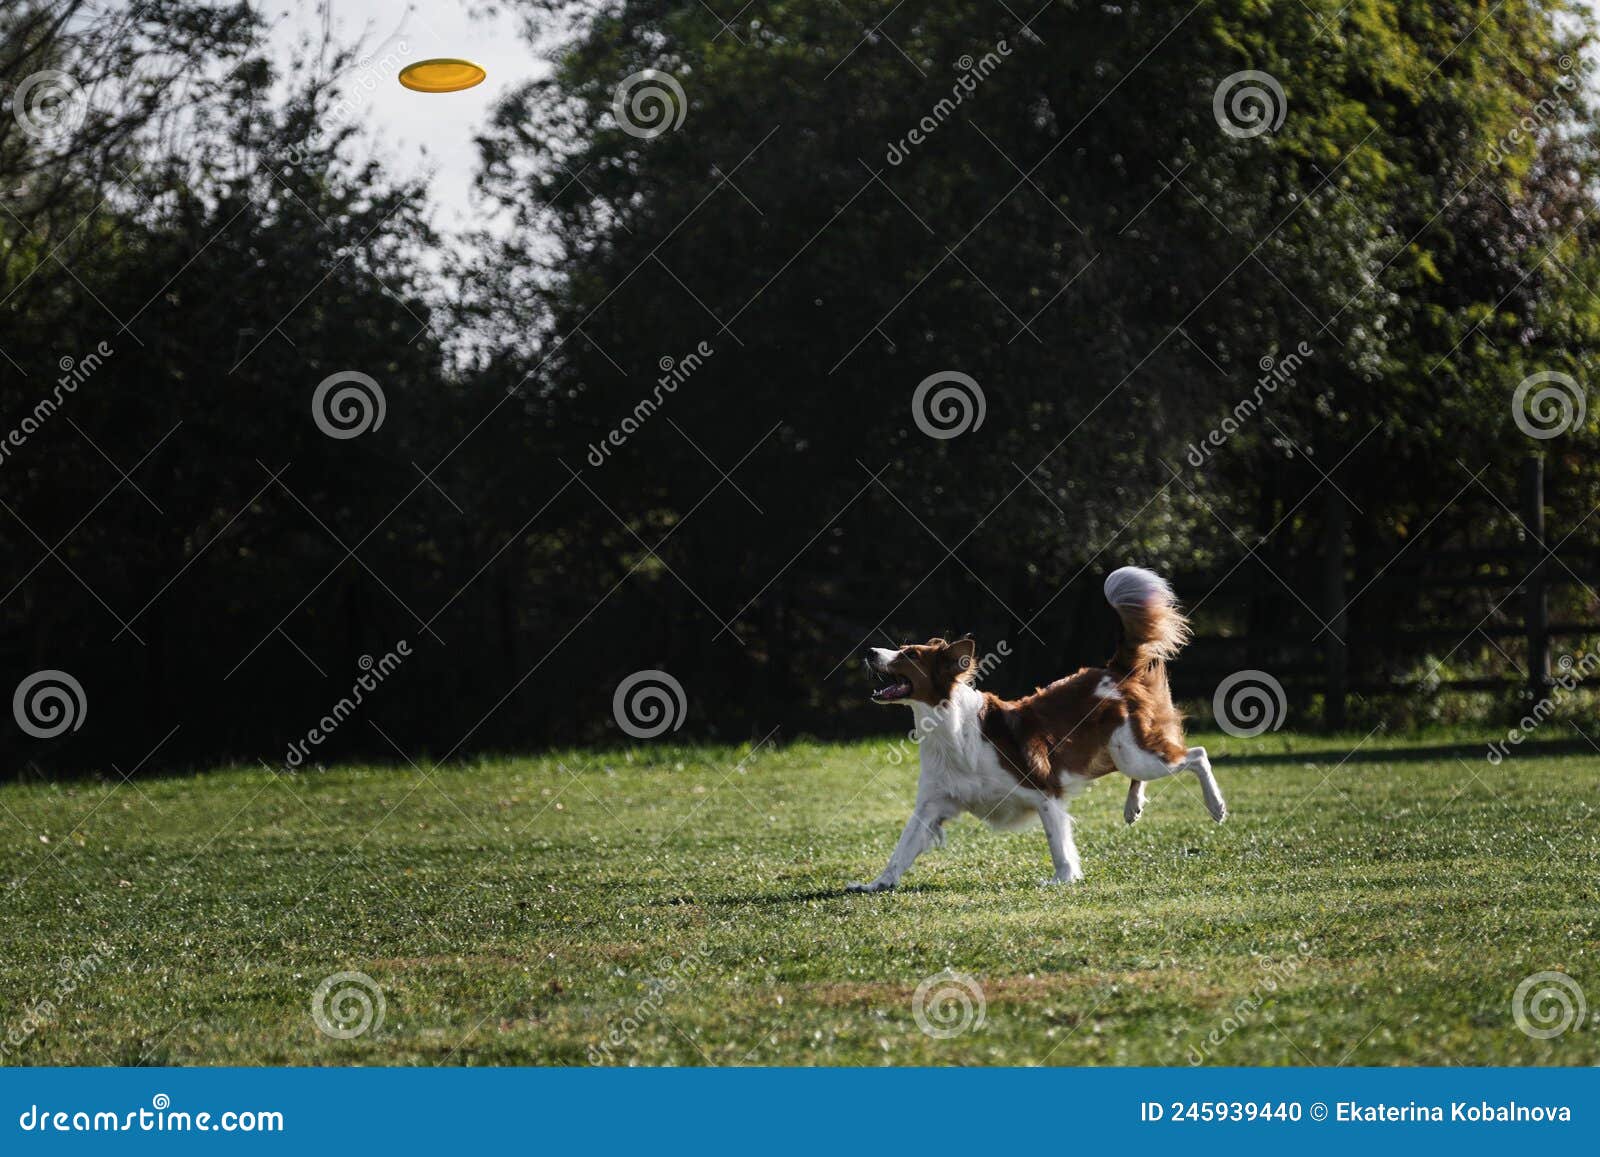 dog frisbee. border collie of red sable color runs quickly through green grass and tries to catch up flying saucer. the pet wants